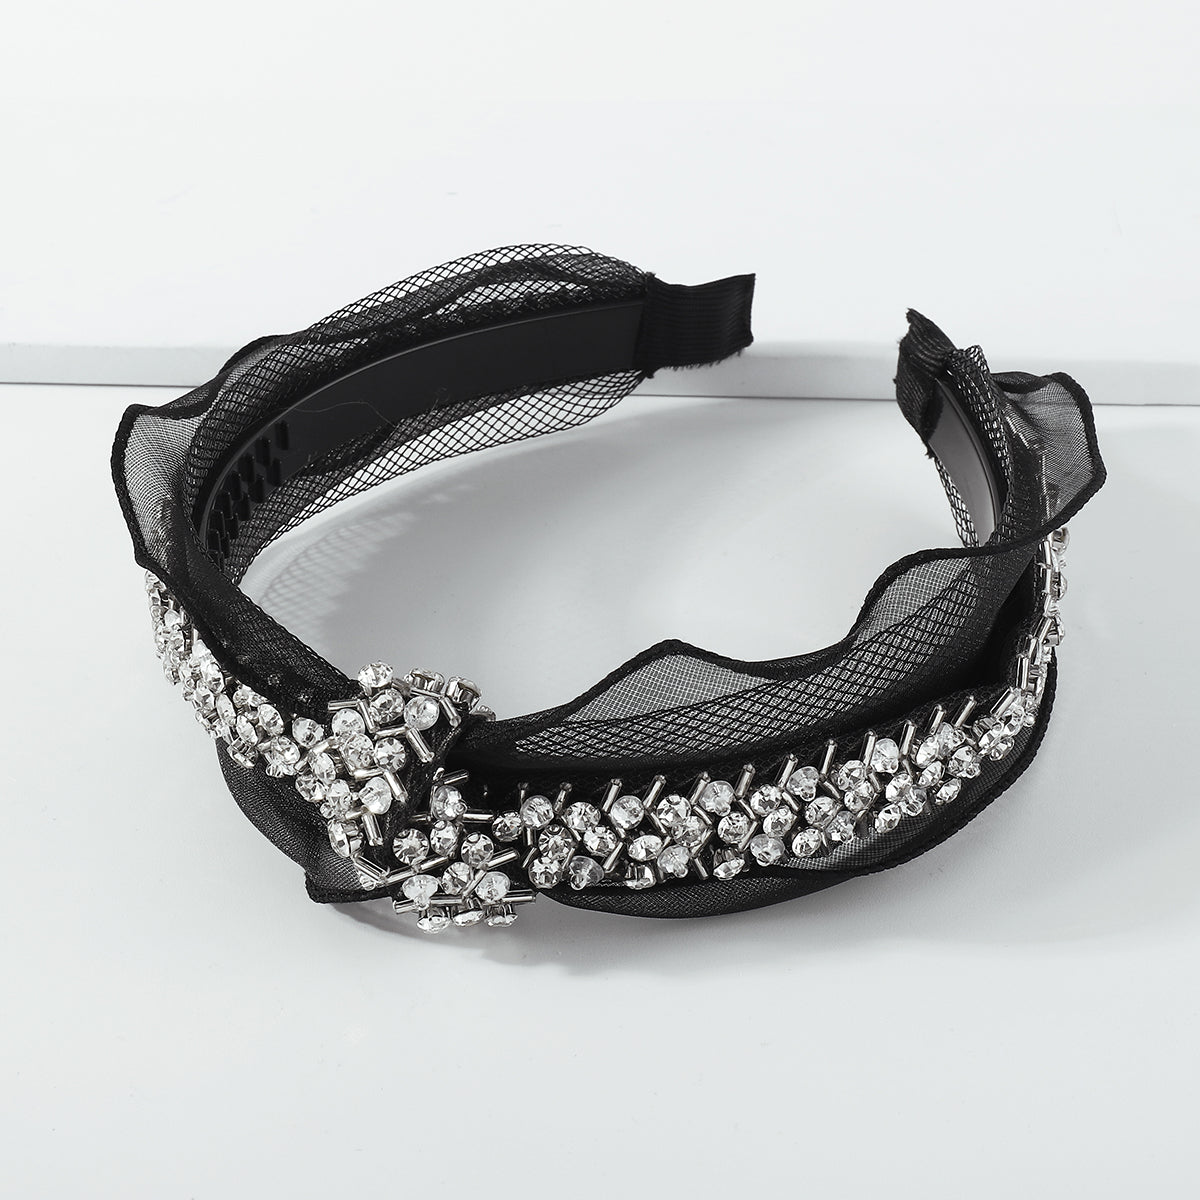 Sparkling Crystal Black Knotted Hairband medyjewelry